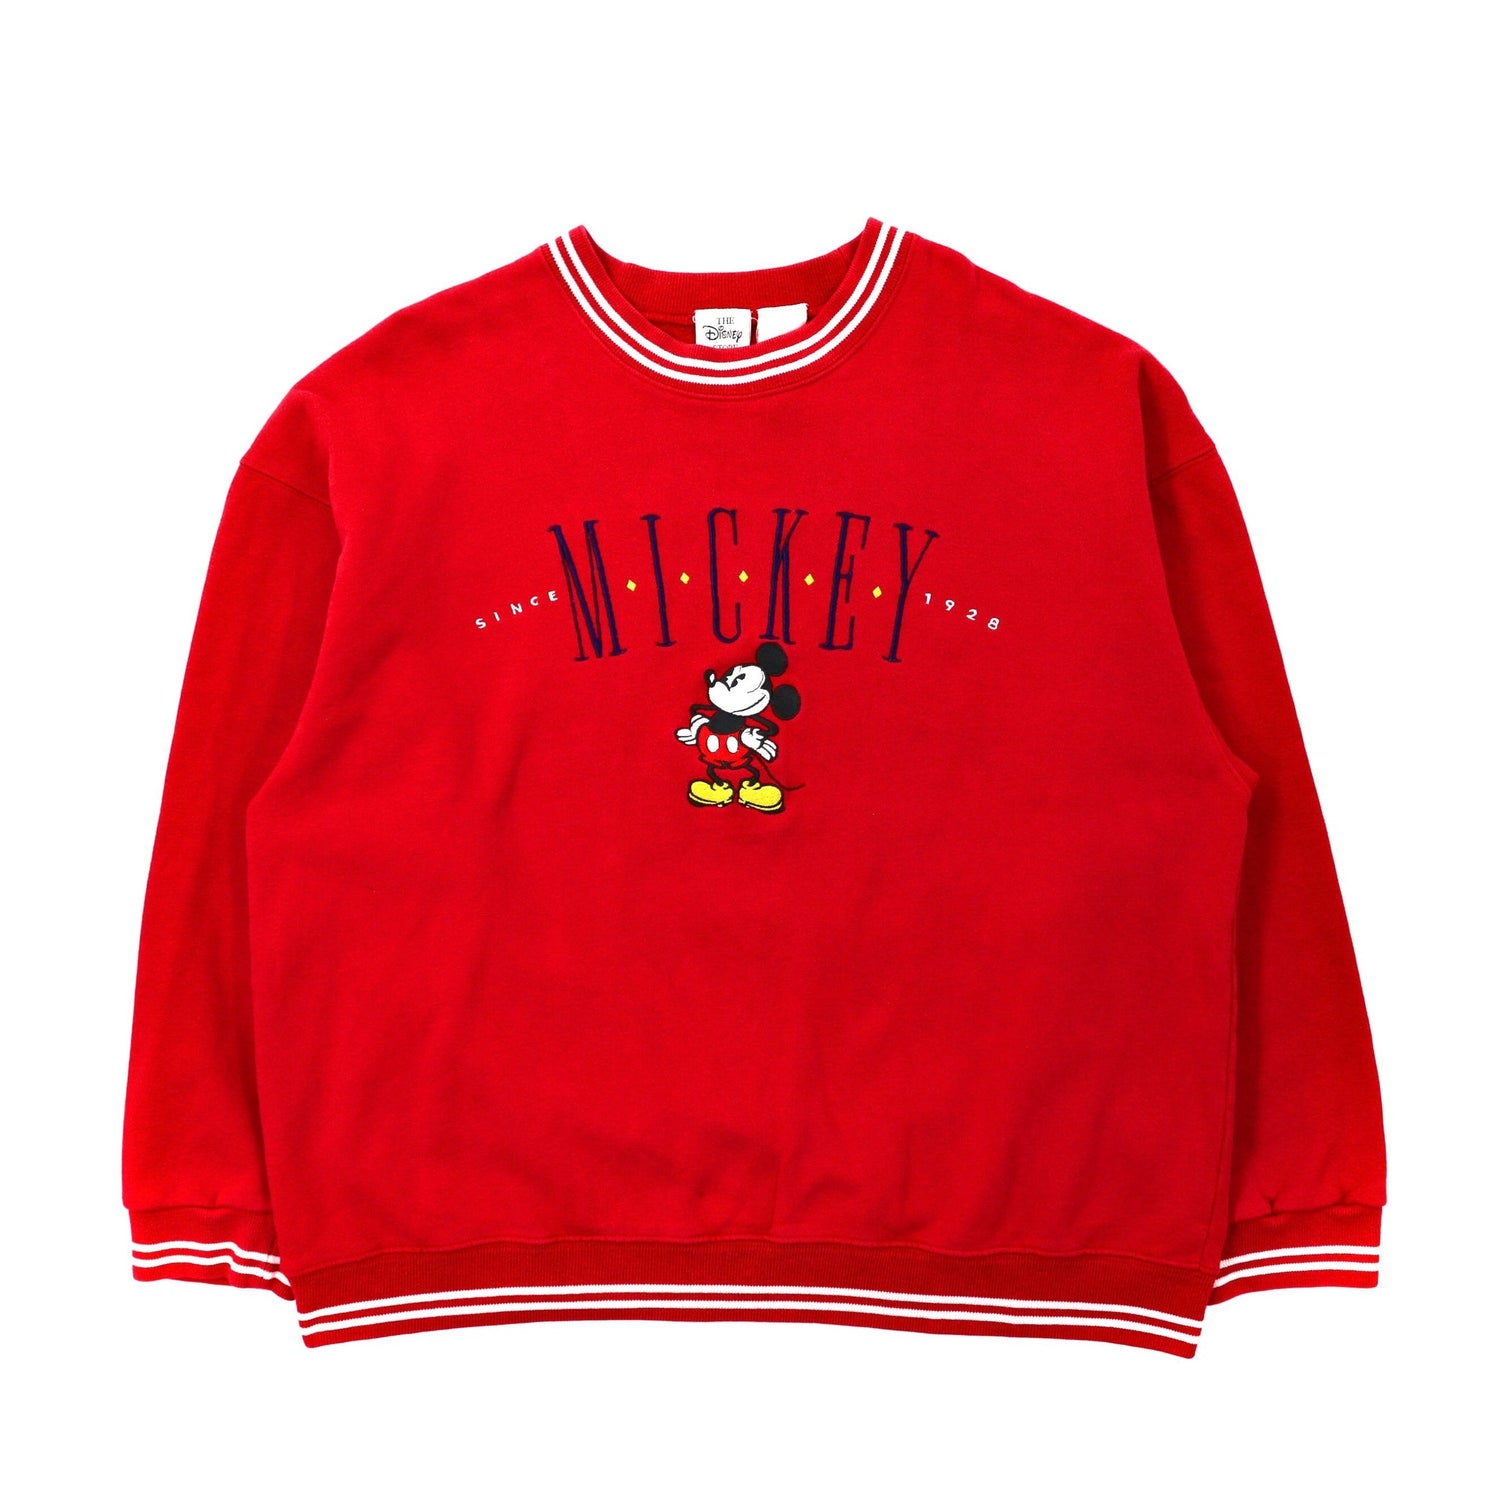 The Disney Store SWEATSHIRT L Red Mickey Mouse Embroidery 90s – 日本然リトテ